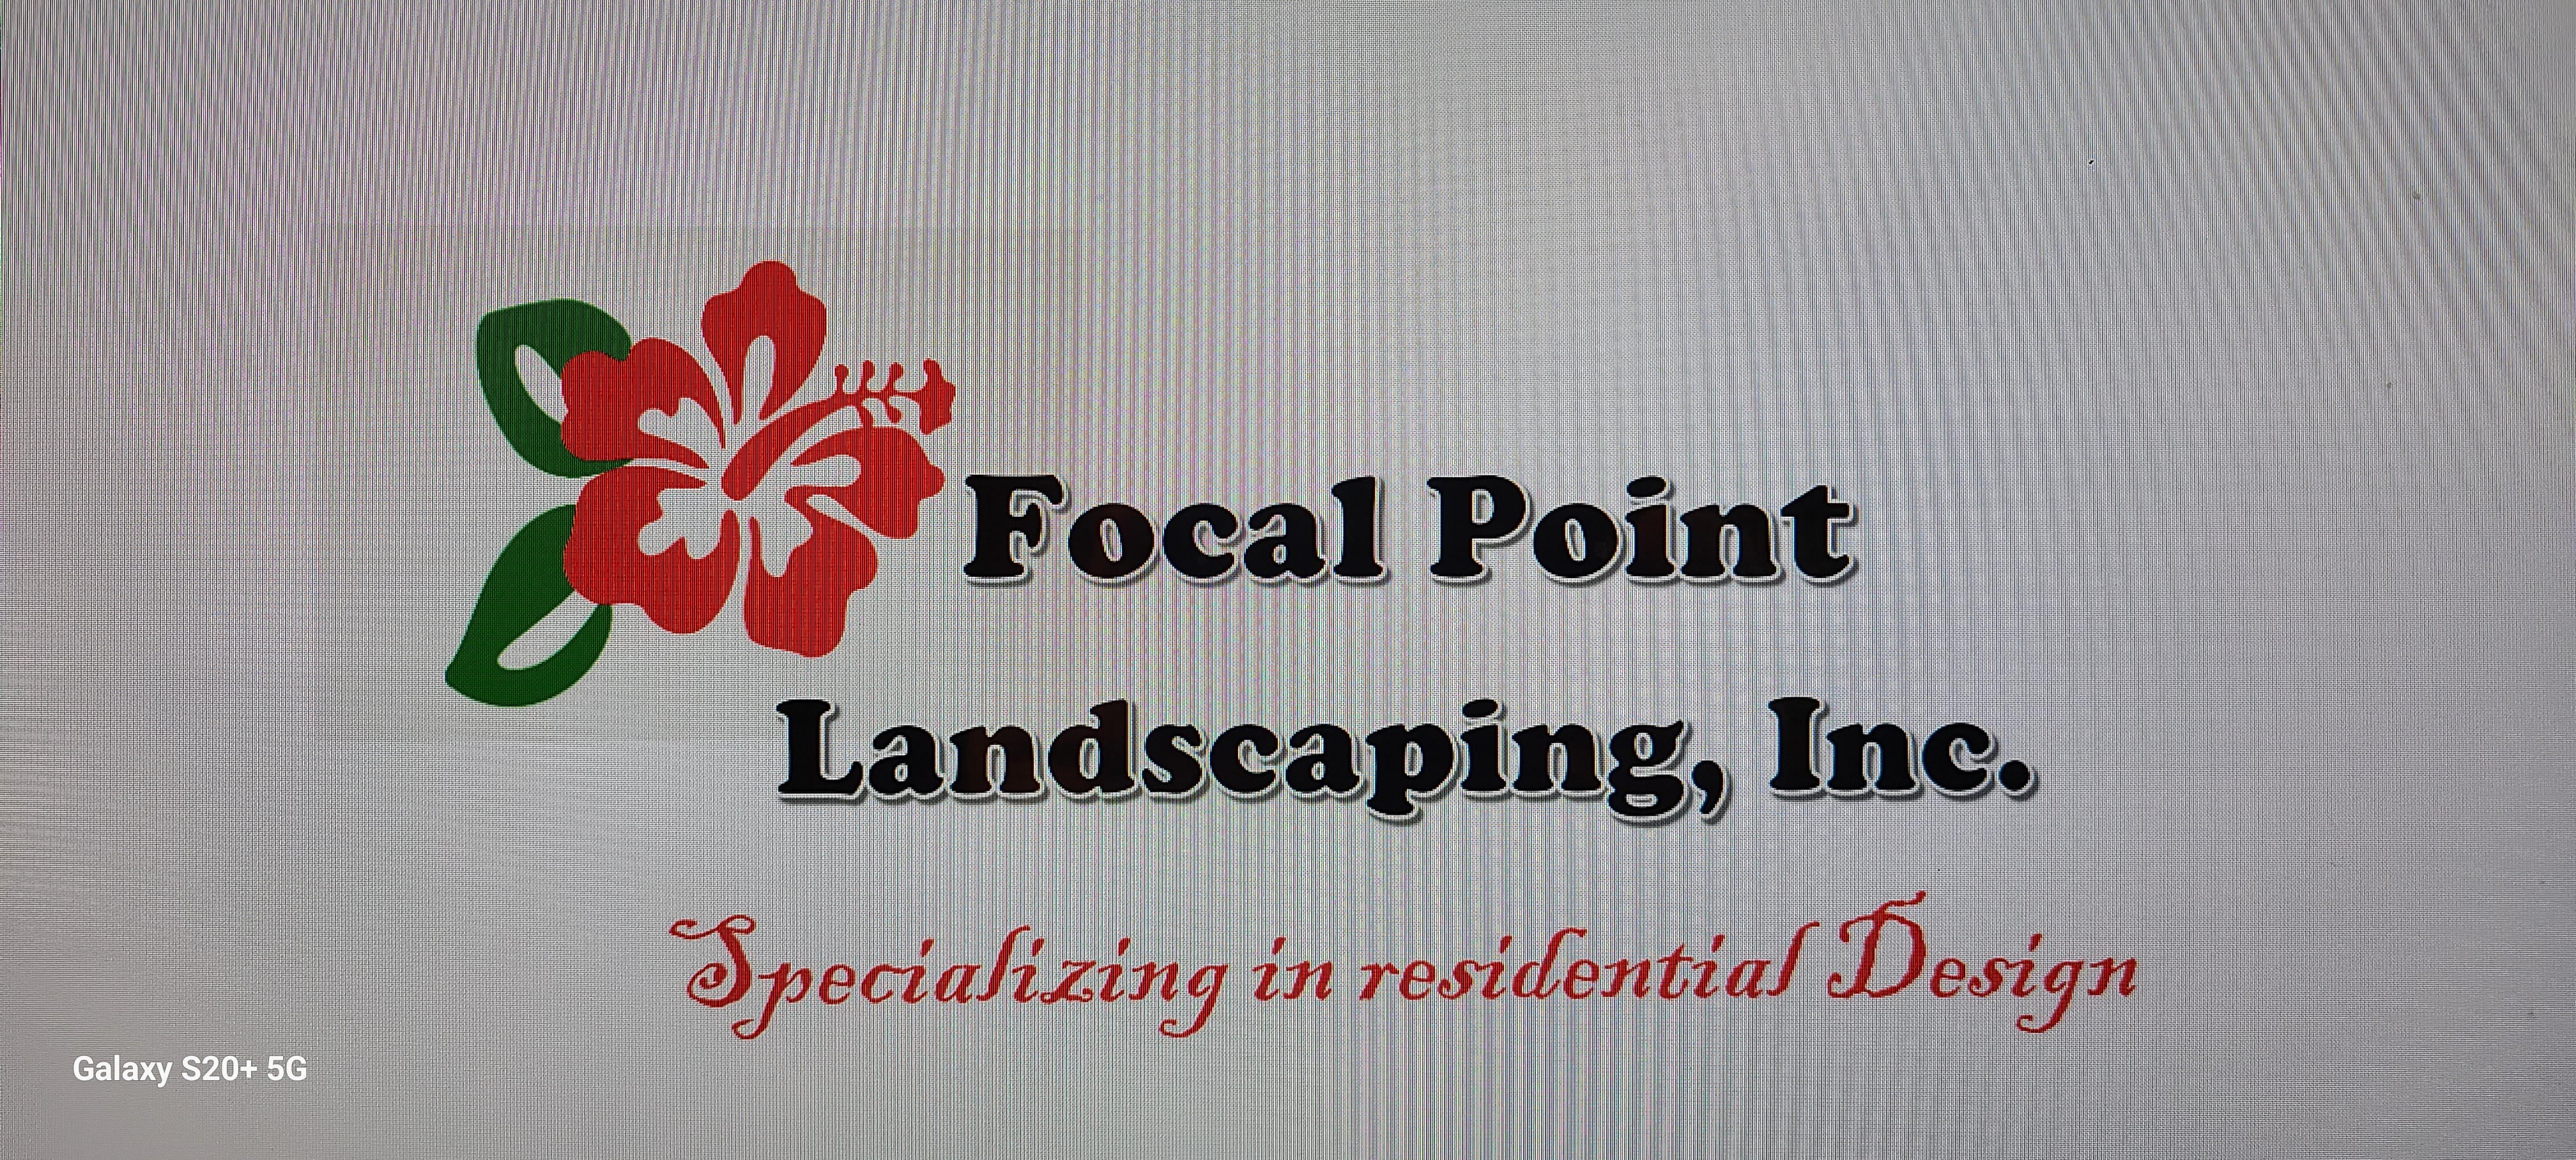 Focal Point Landscaping, Inc. Logo